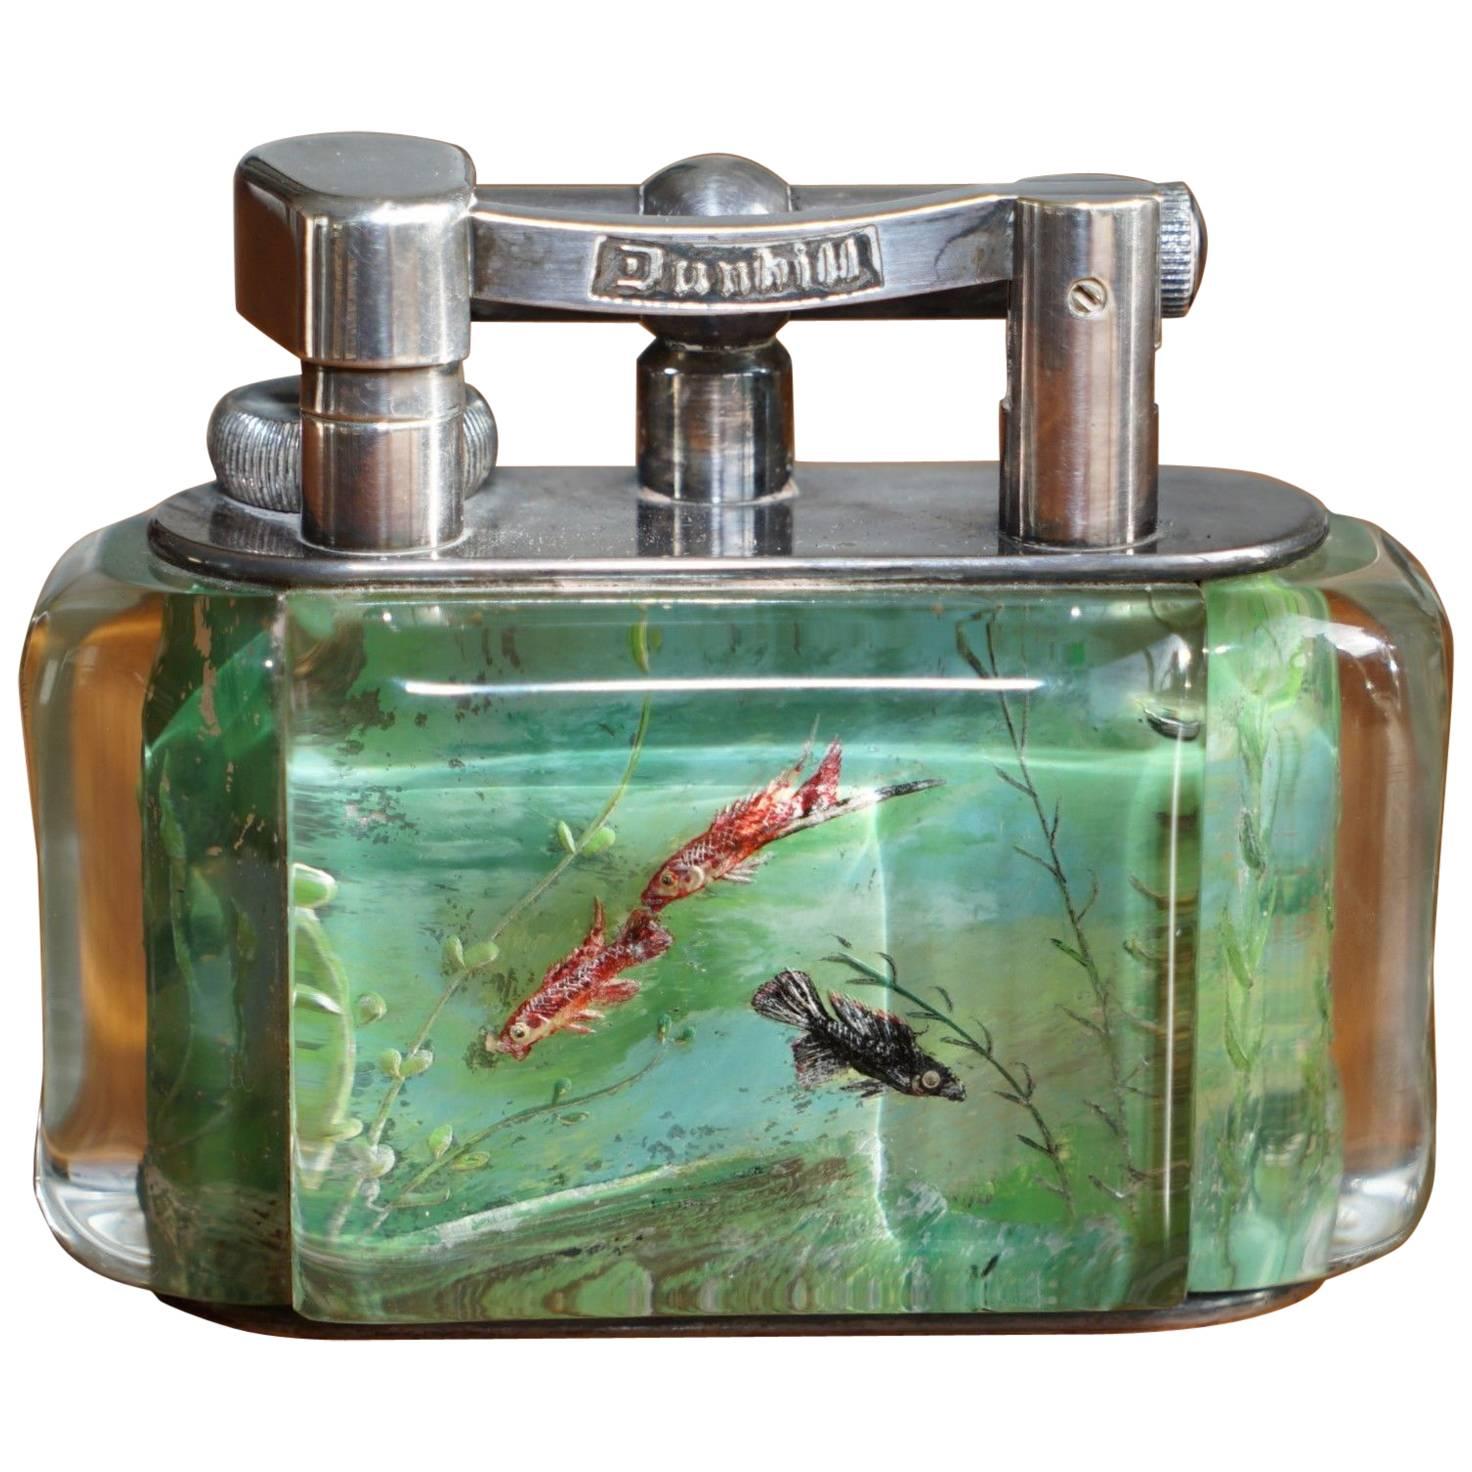 Museum Quality 1950s Dunhill Aquarium Oversized Table Lighter Made in England